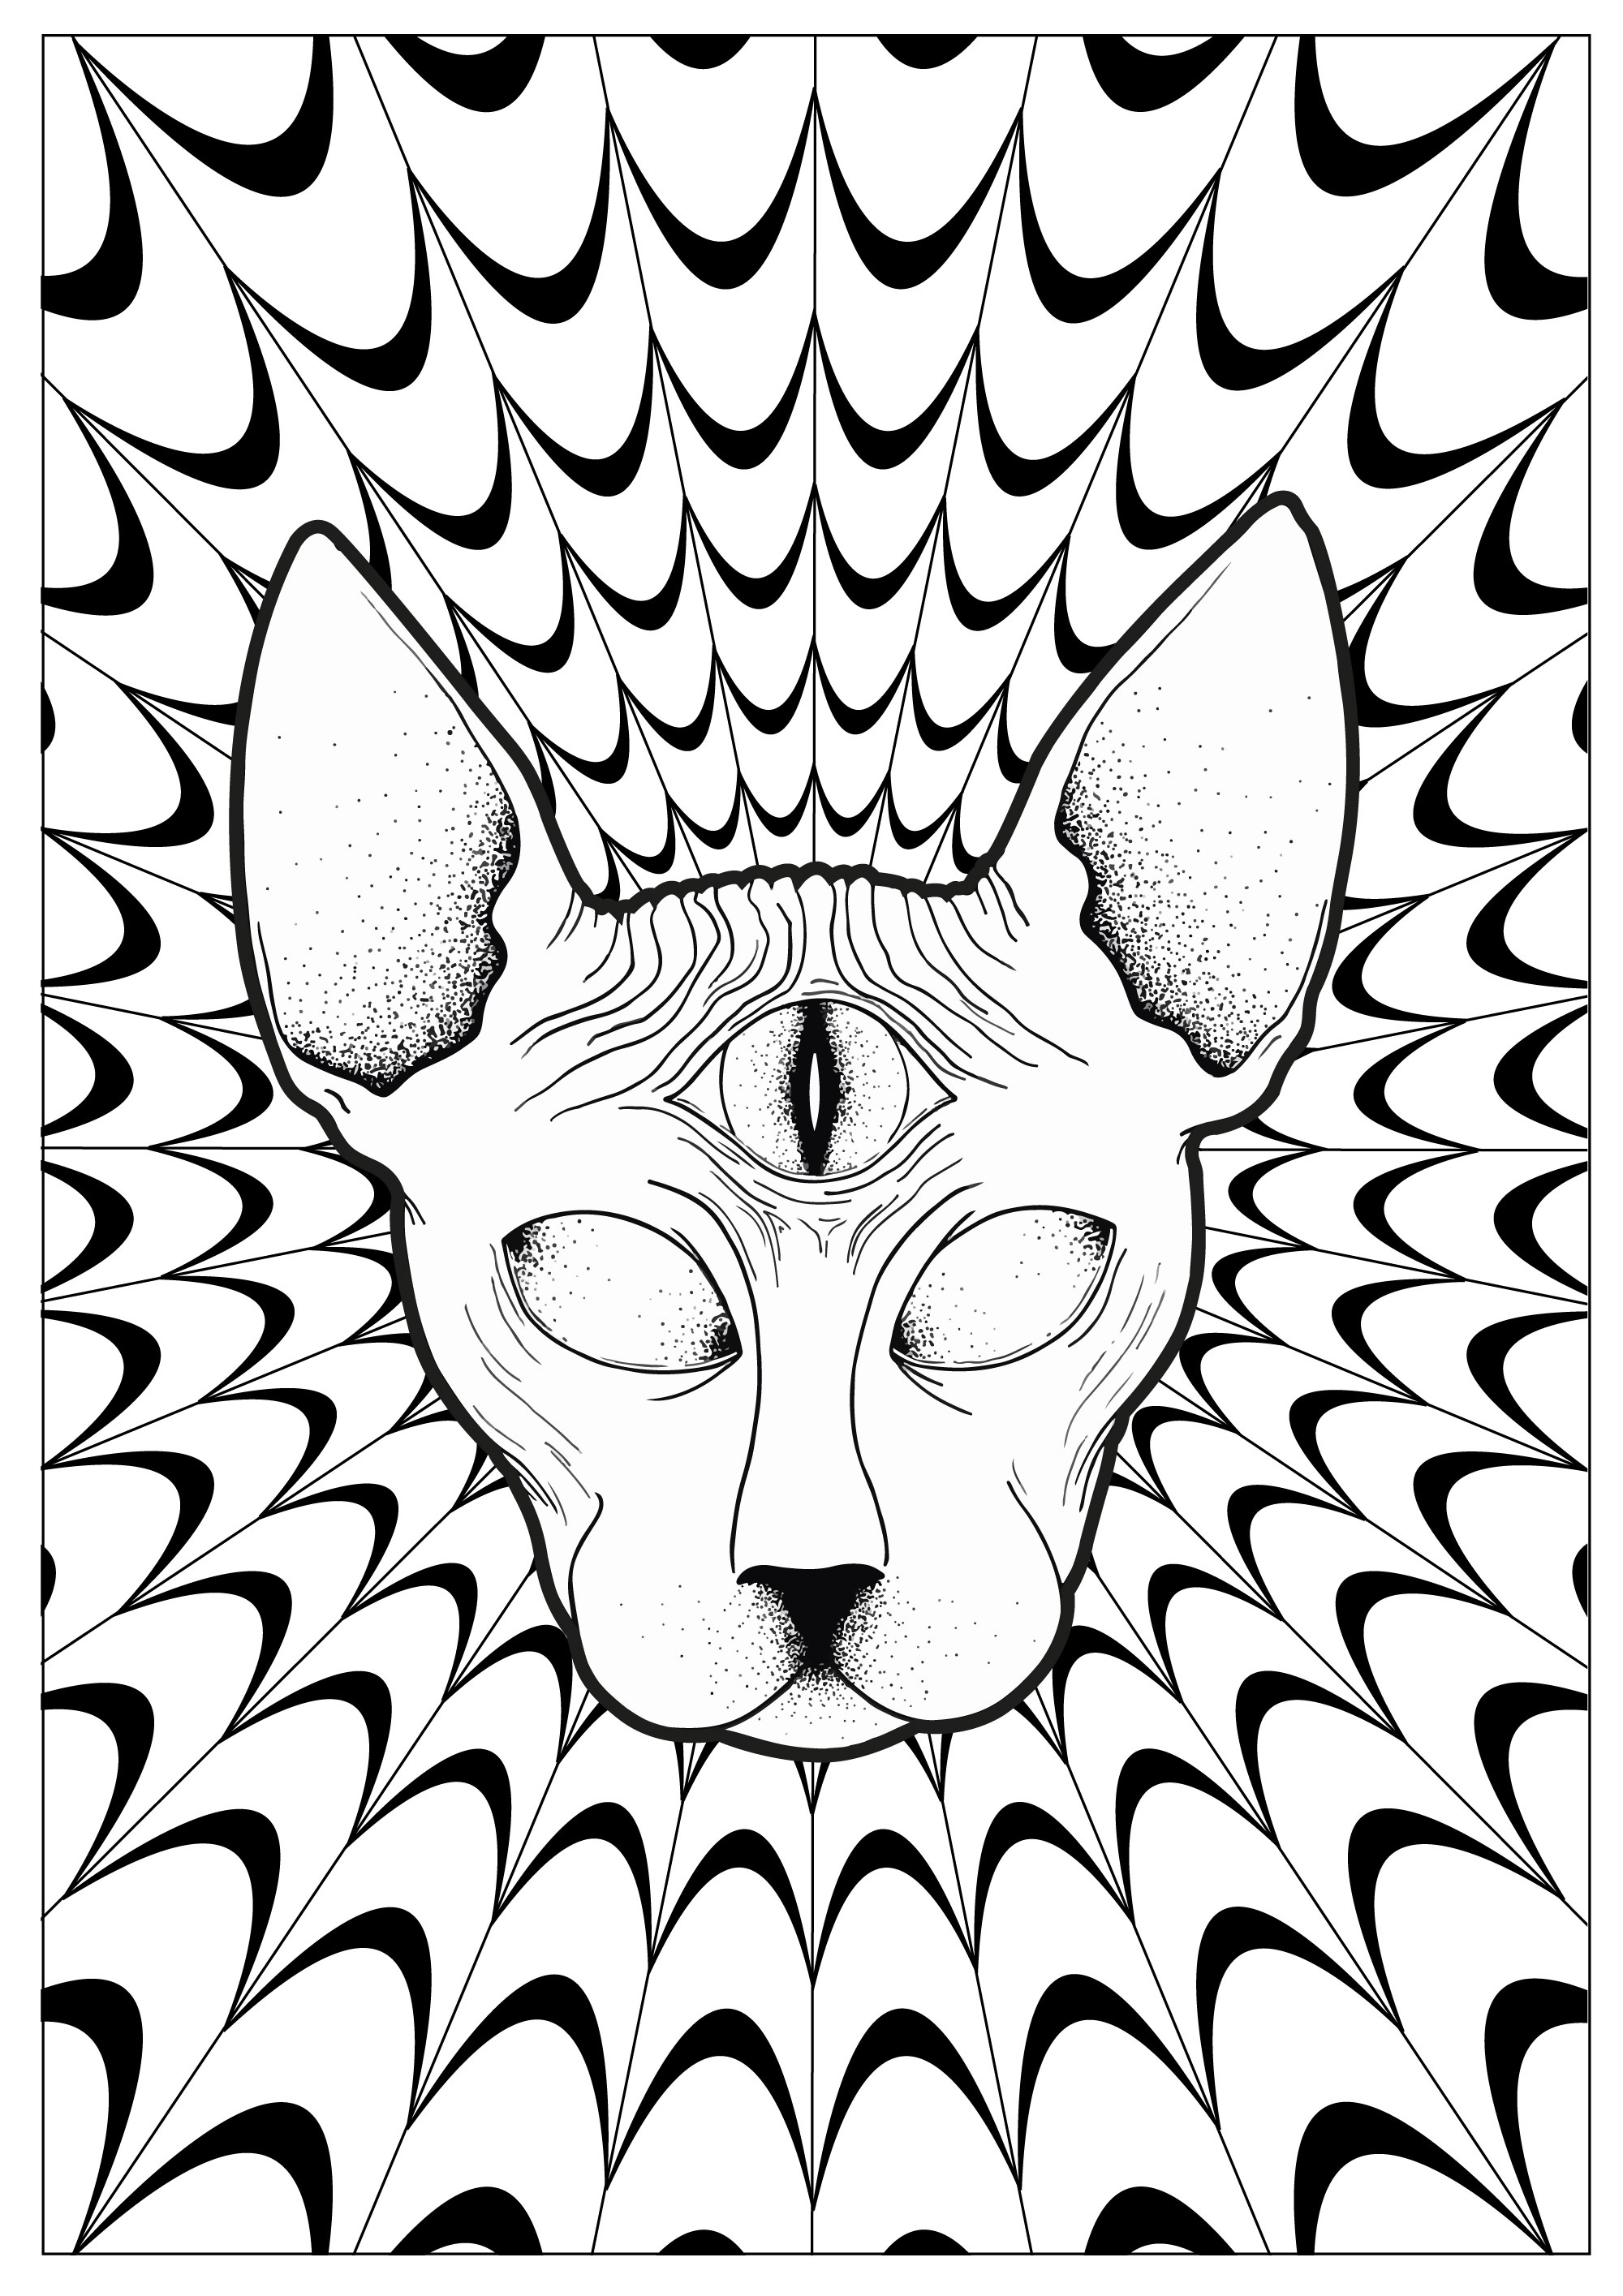 Psychedelic - Coloring Pages For Adults - Free Printable Trippy Coloring Pages